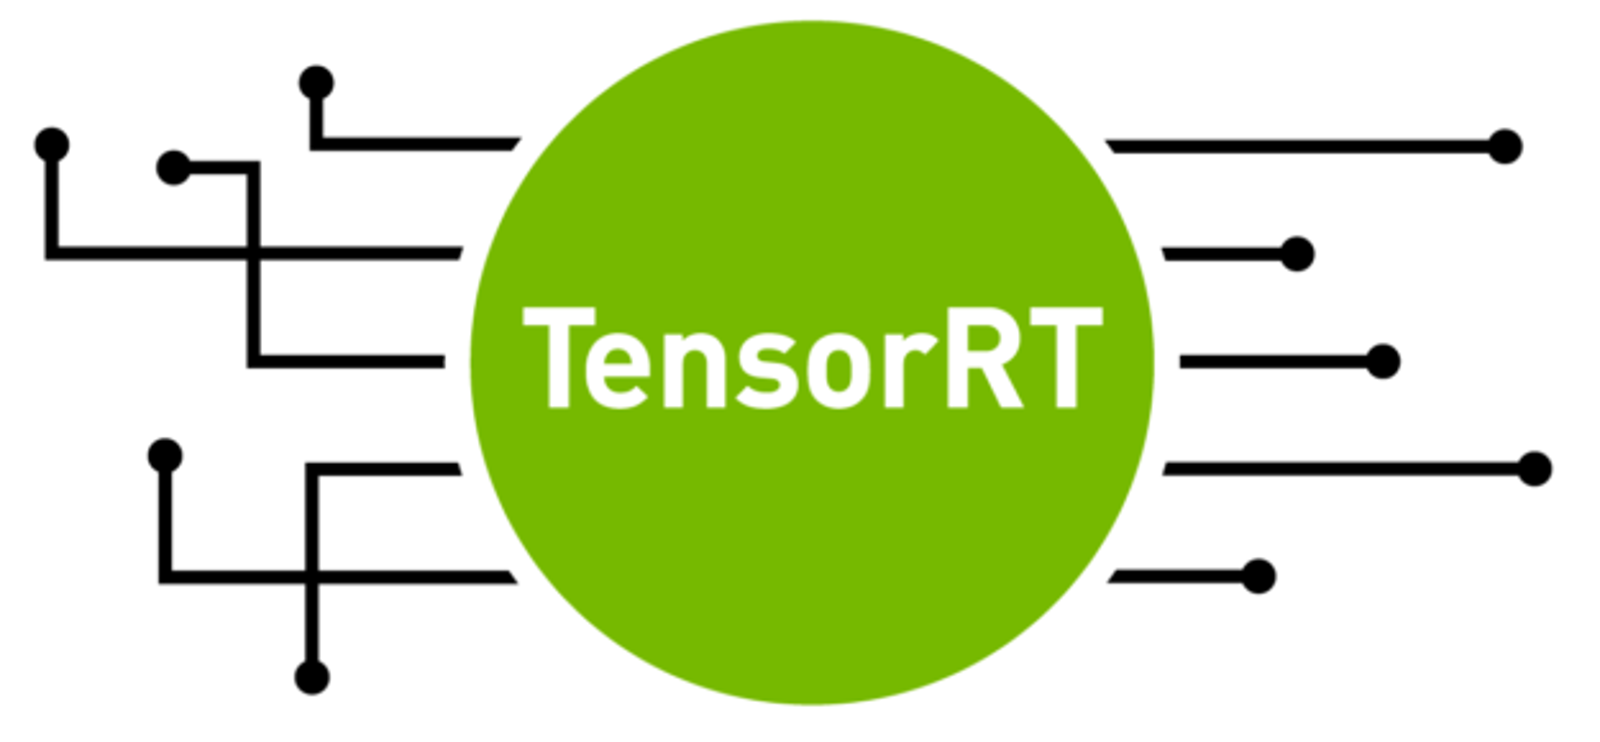 100% Speed boost in AUTOMATIC1111 for RTX GPUS! Optimizing checkpoints with TensorRT Extension